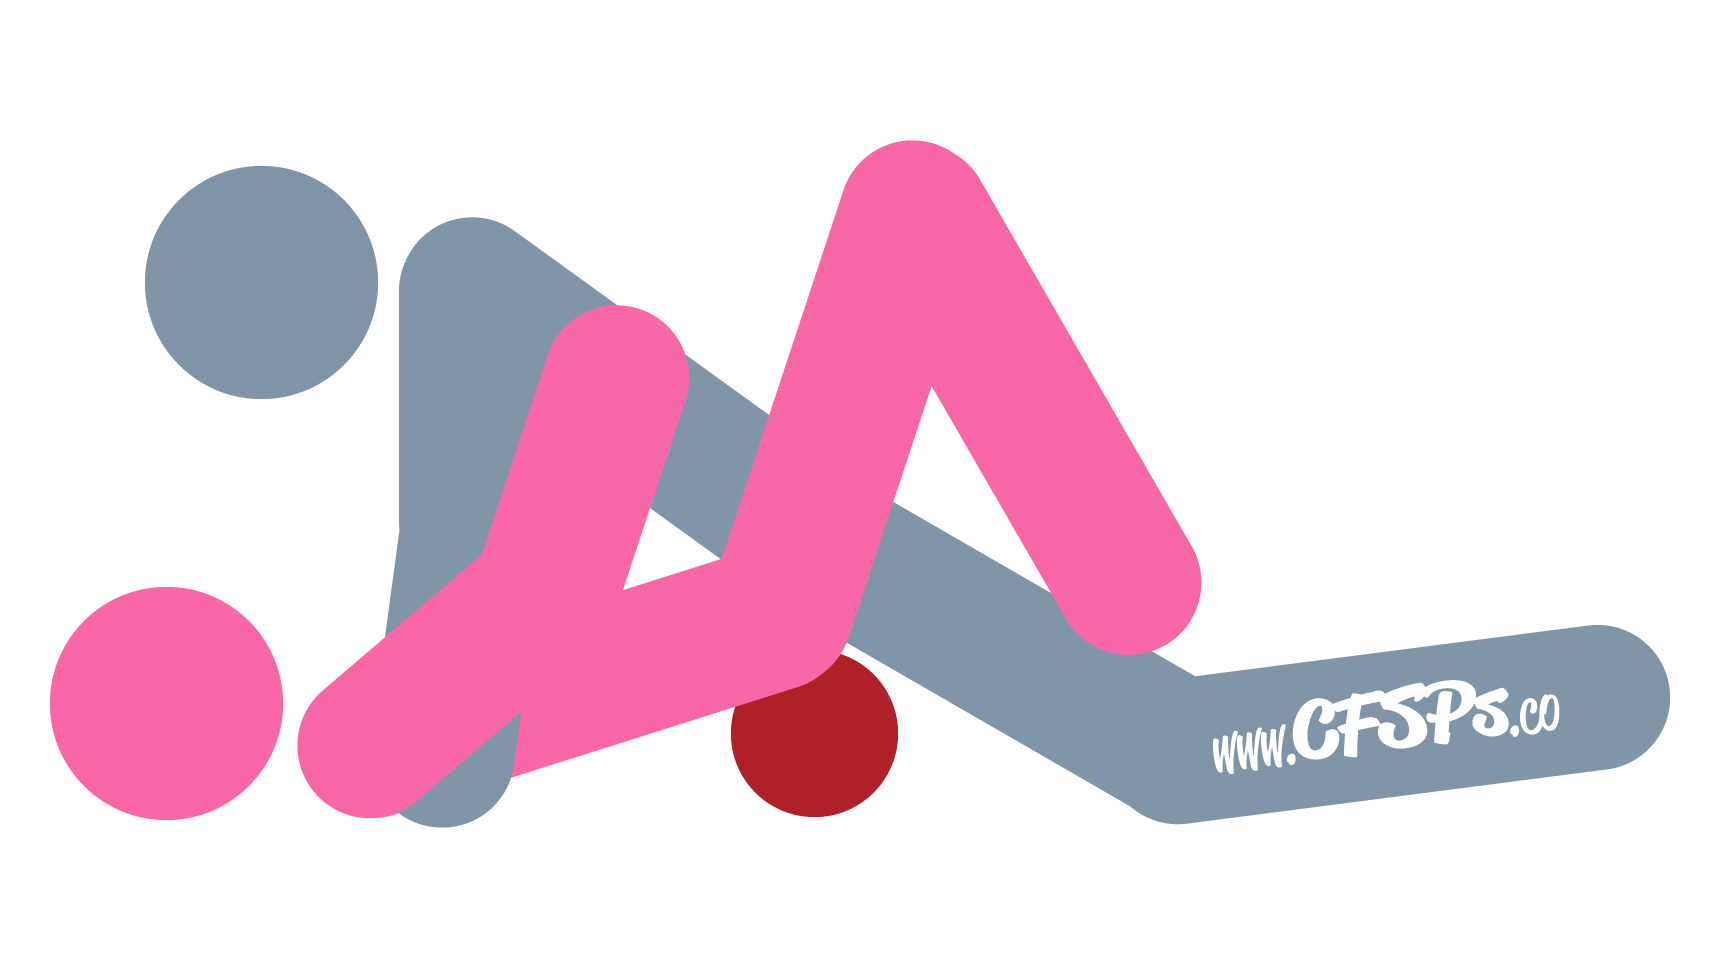 This stick figure image depicts a man and woman having sex in the Circle Driver sex position. The woman is lying on her back with a Liberator Whirl sex pillow under her butt. The man is lying between her legs with his arms supporting his upper body next to her shoulders on the bed.